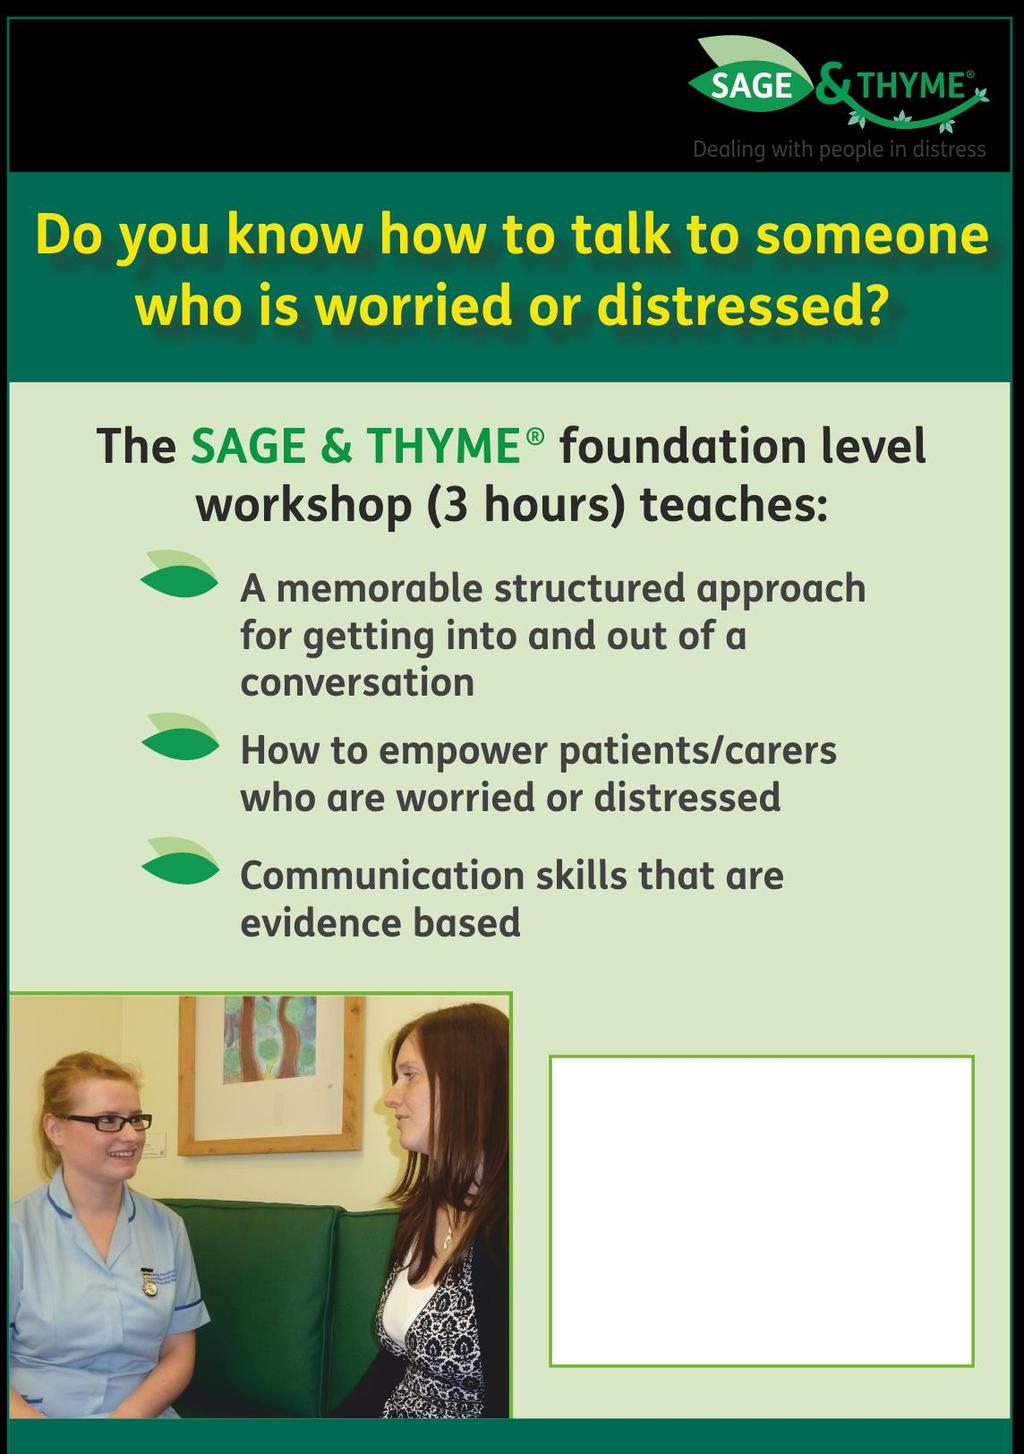 Free of Charge SAGE & THYME Communication Skills Foundation Level Workshop Primary Audience: This training is intended for all staff and volunteers who come into contact